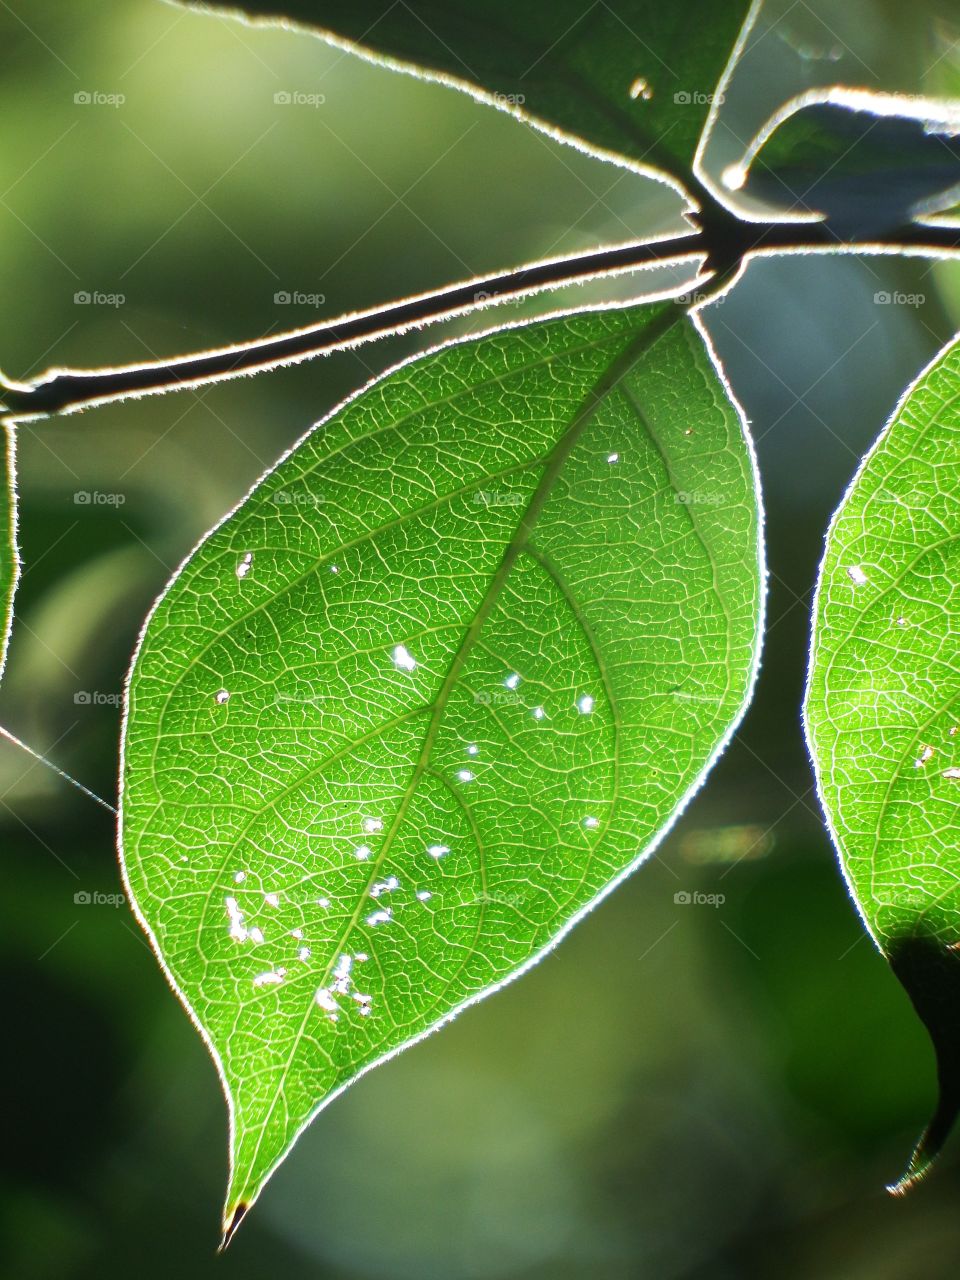 Green tree leaf in the sun closeup with light shining through.